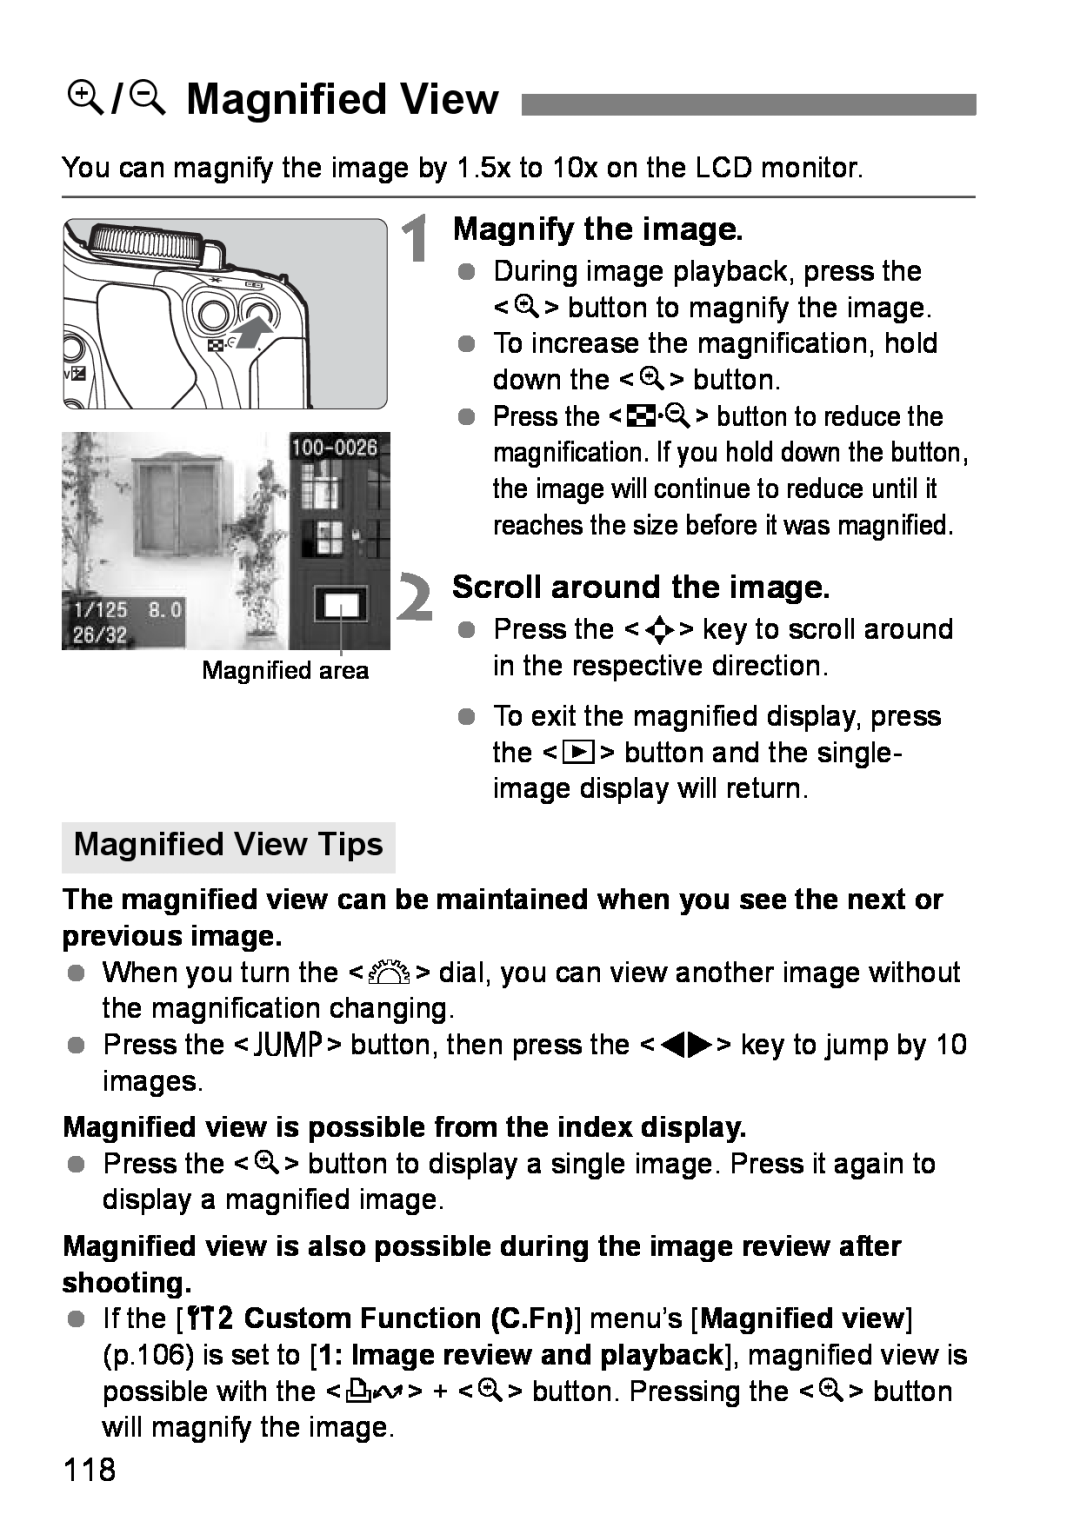 Canon EOS DIGITAL REBEL XTI u/yMagnified View, Magnify the image, Scroll around the image, Magnified View Tips 